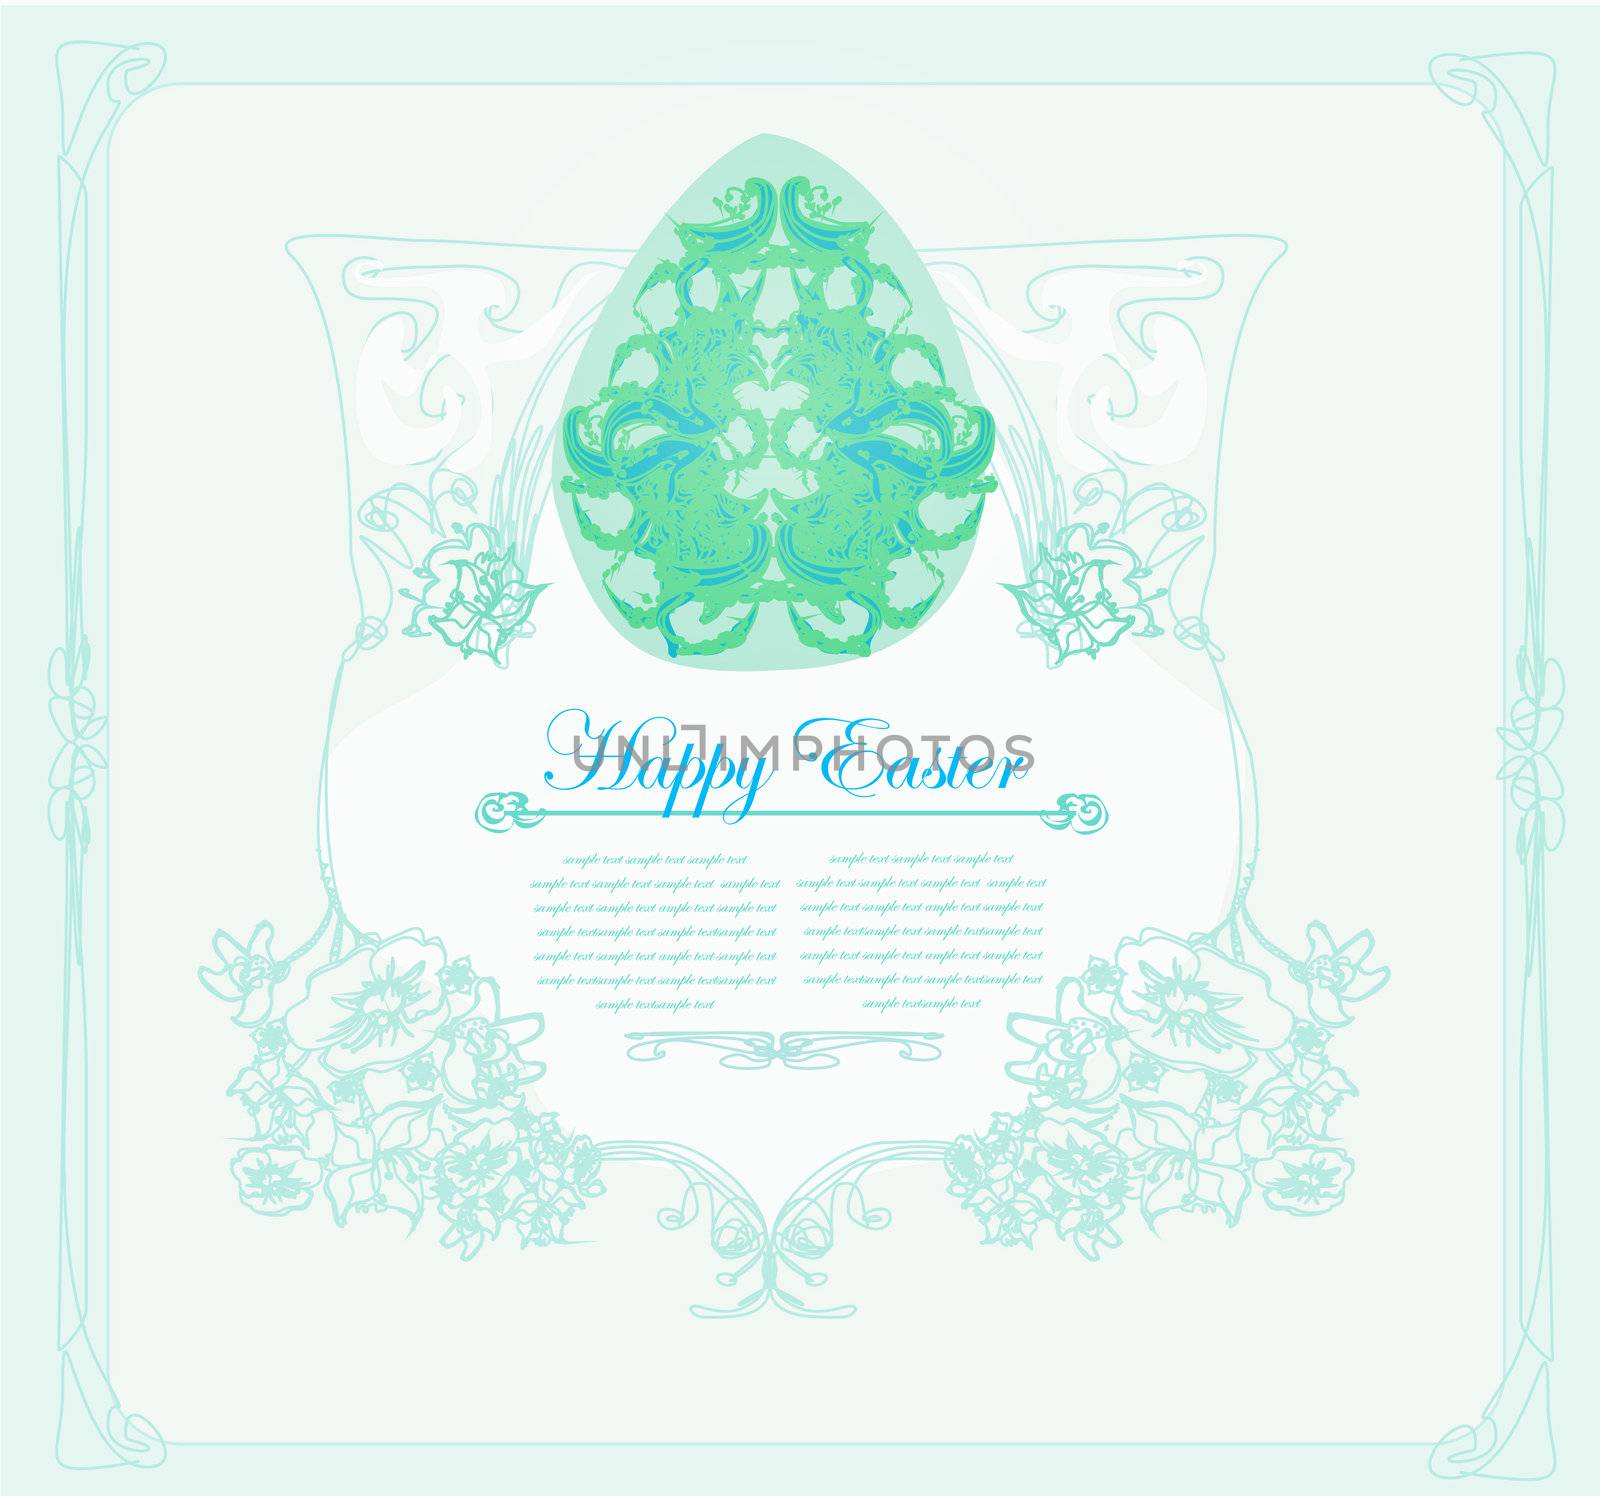 Easter Egg On Grunge Background by JackyBrown